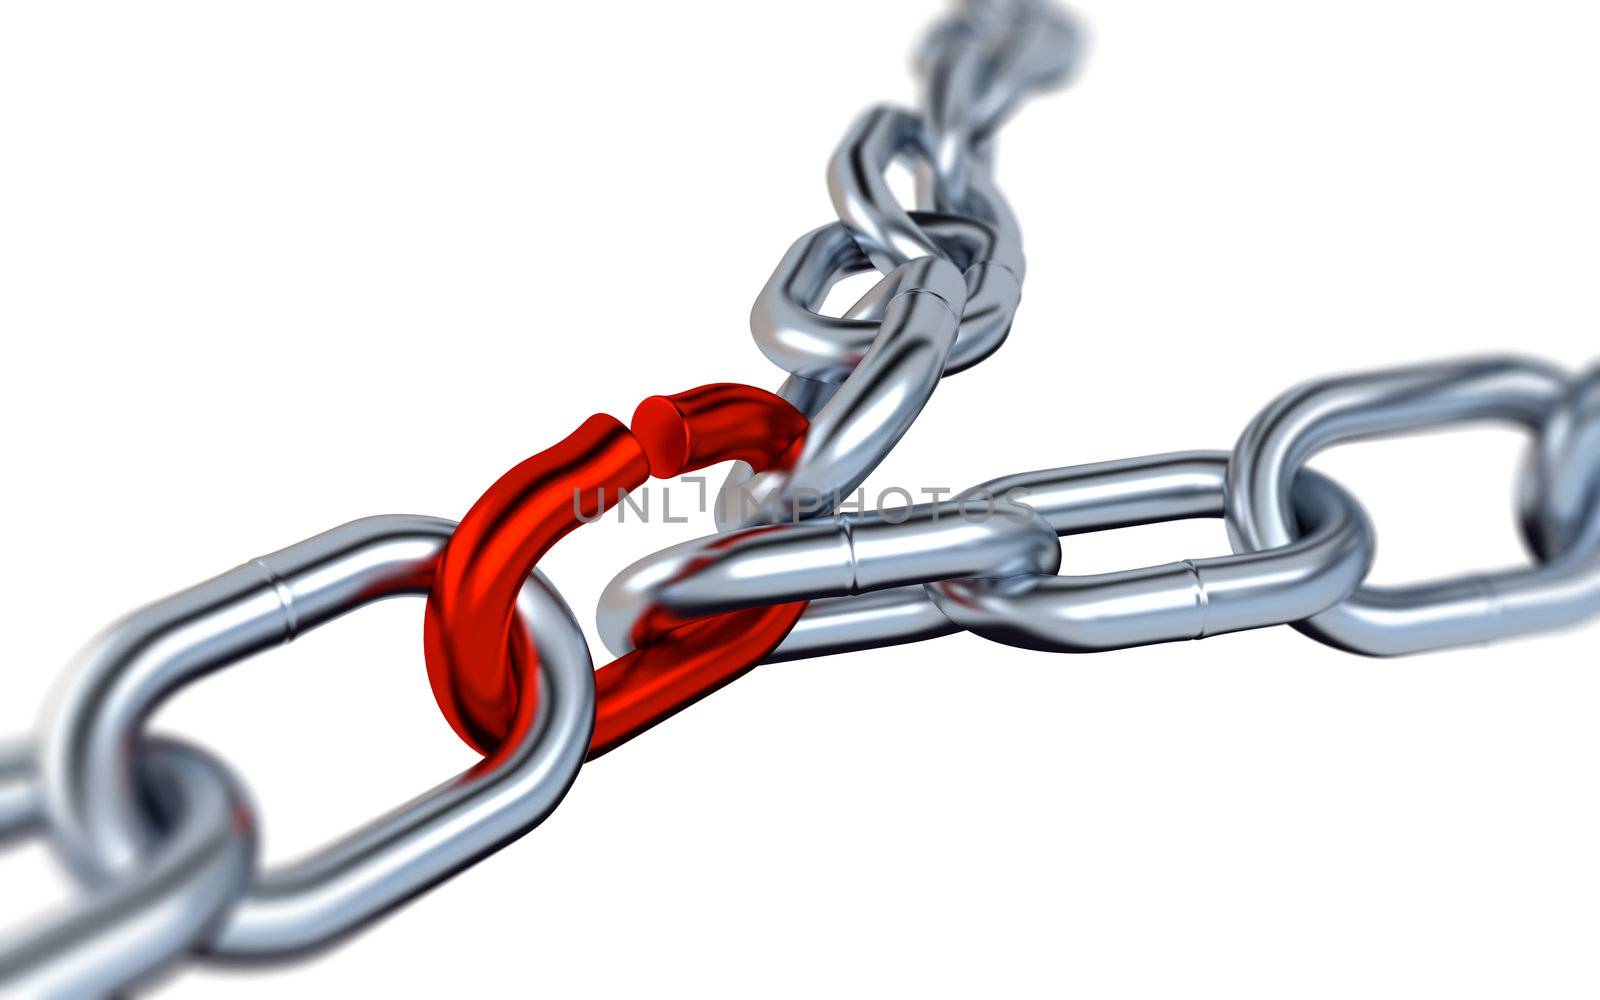 Two Blurred Metallic Chains with One Red Link on a White Background